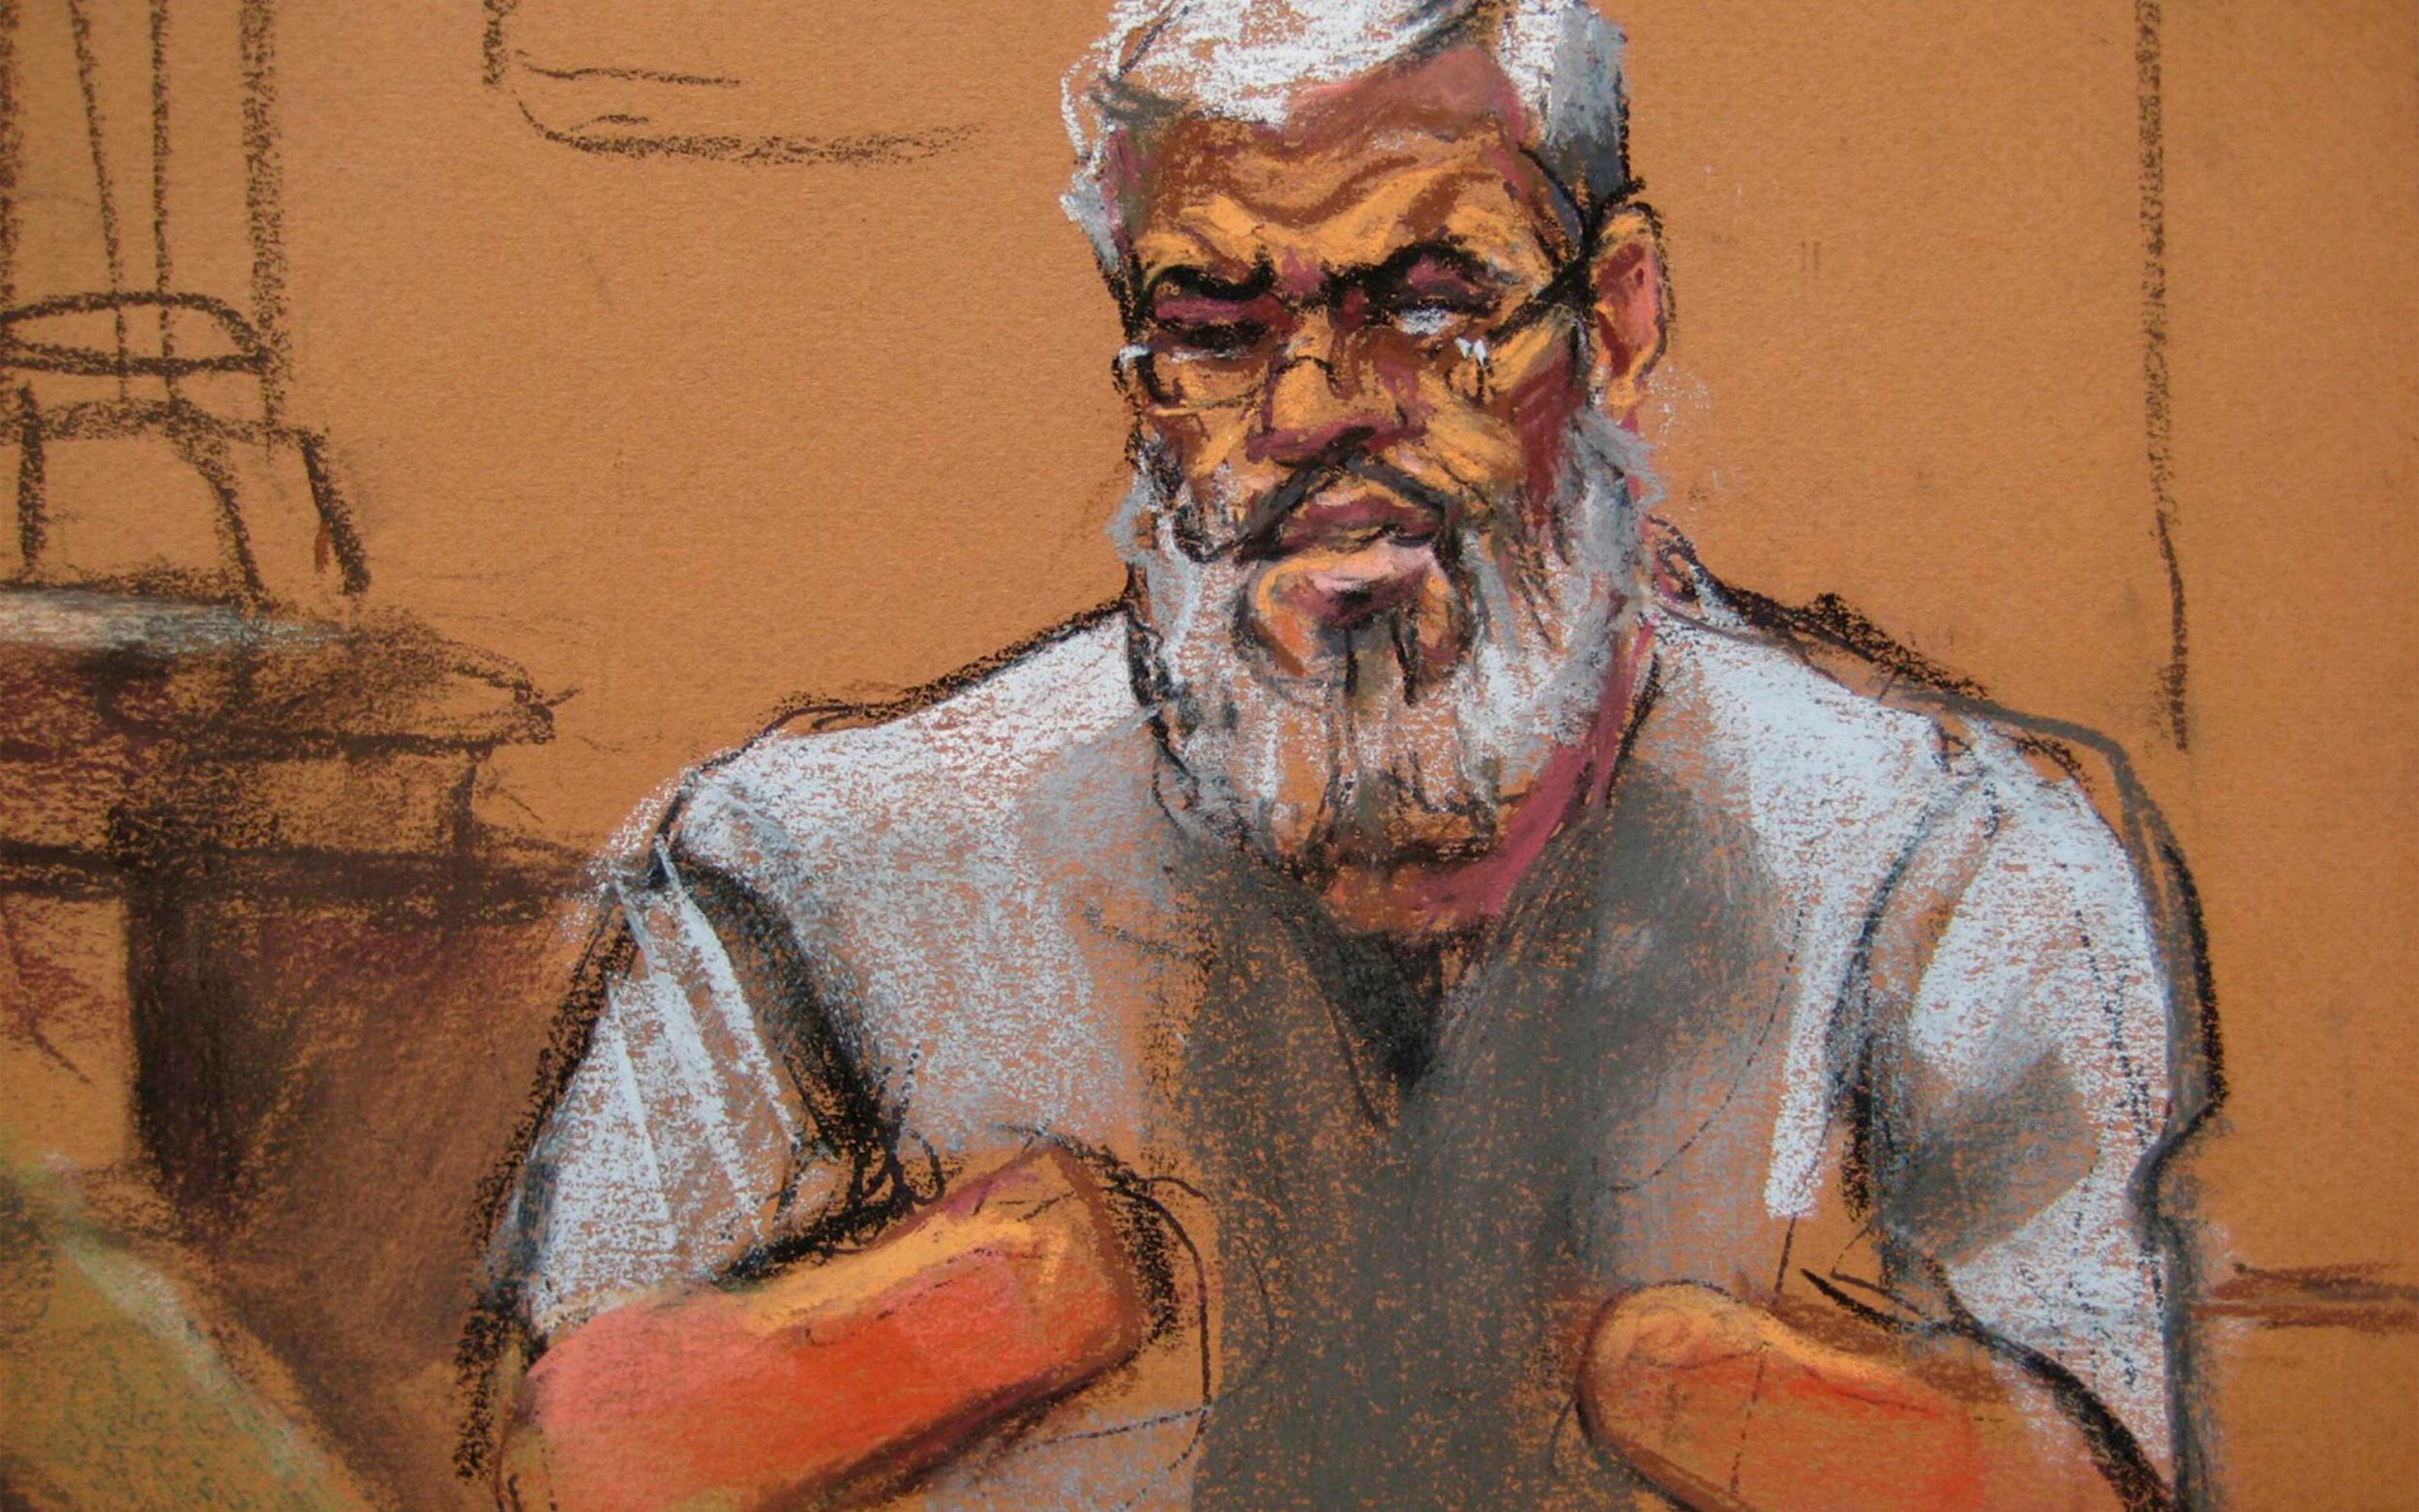 abu hamza’s wife pleads for his release as health deteriorates